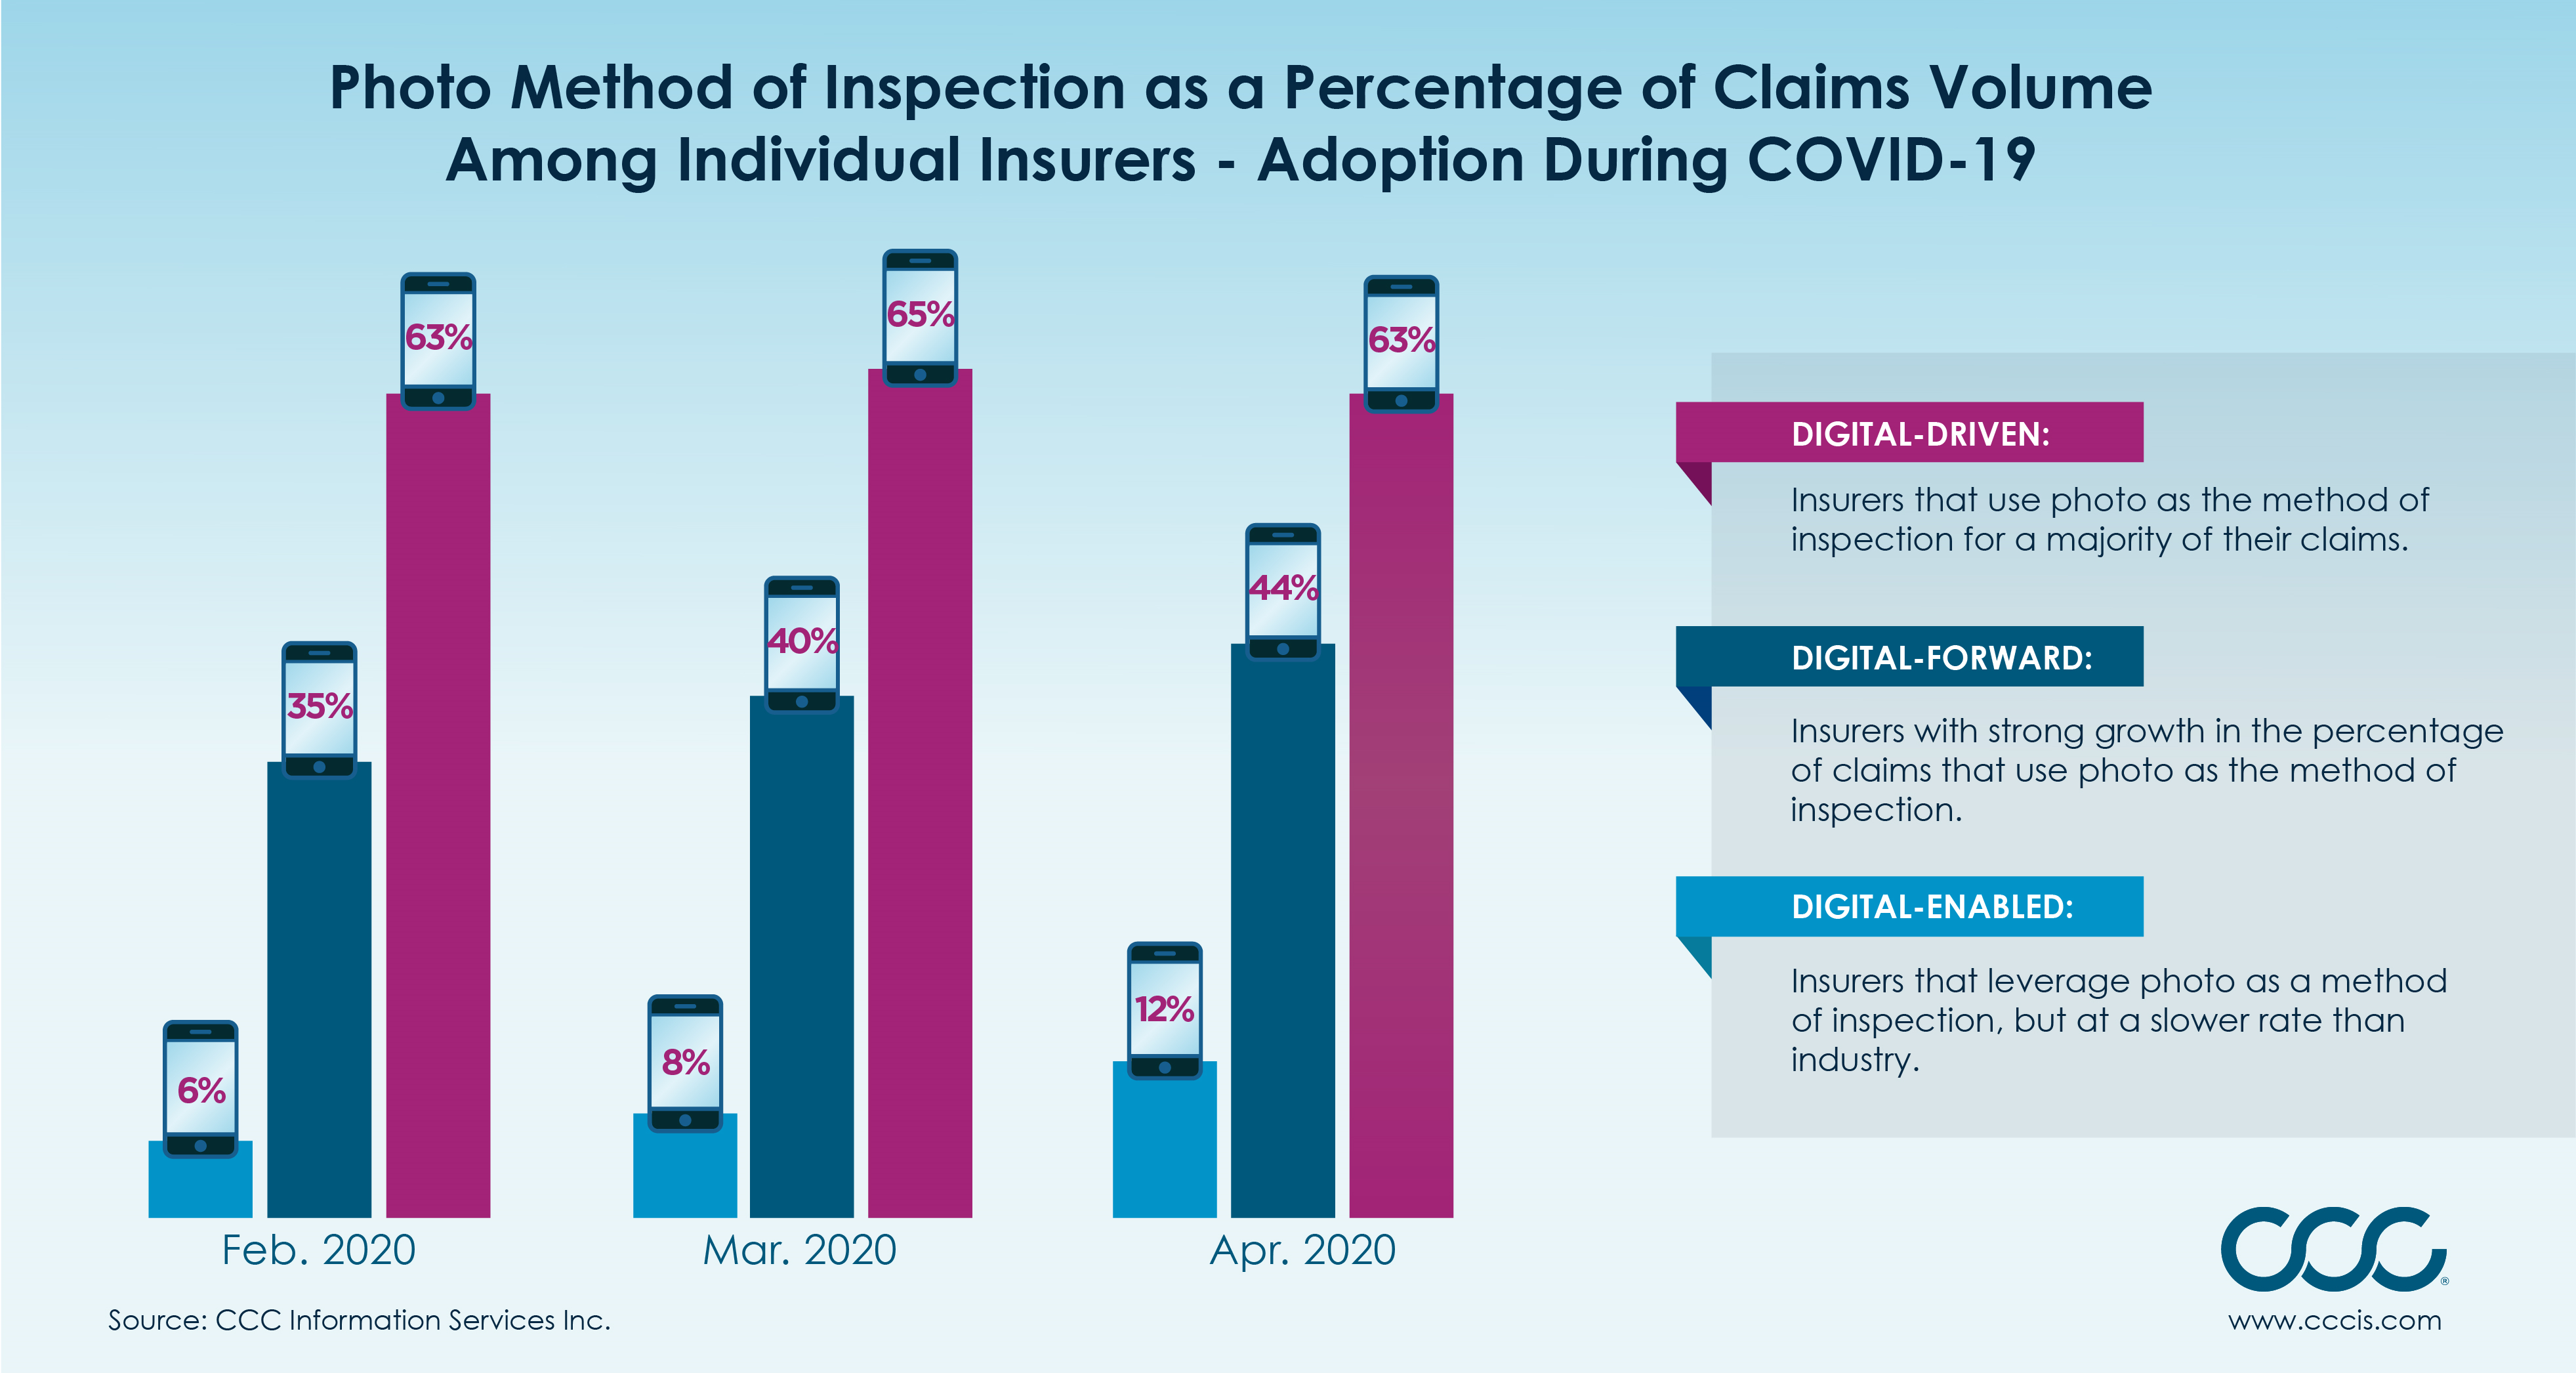 Infographic of photo method inspection as a percentage of claims volume among individual insurers, adoption during COVID-19.